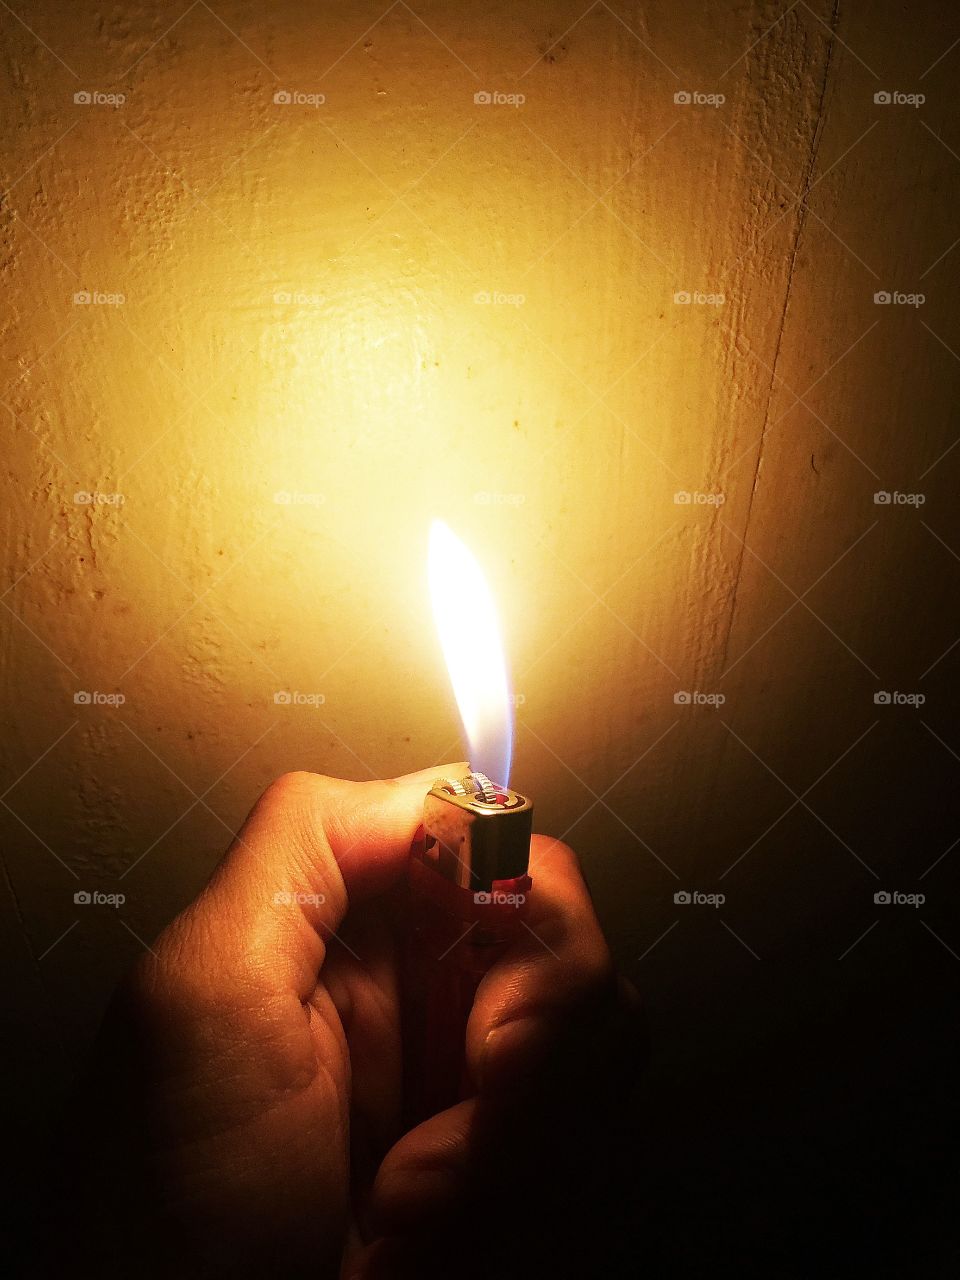 Lighter. new way to burned.